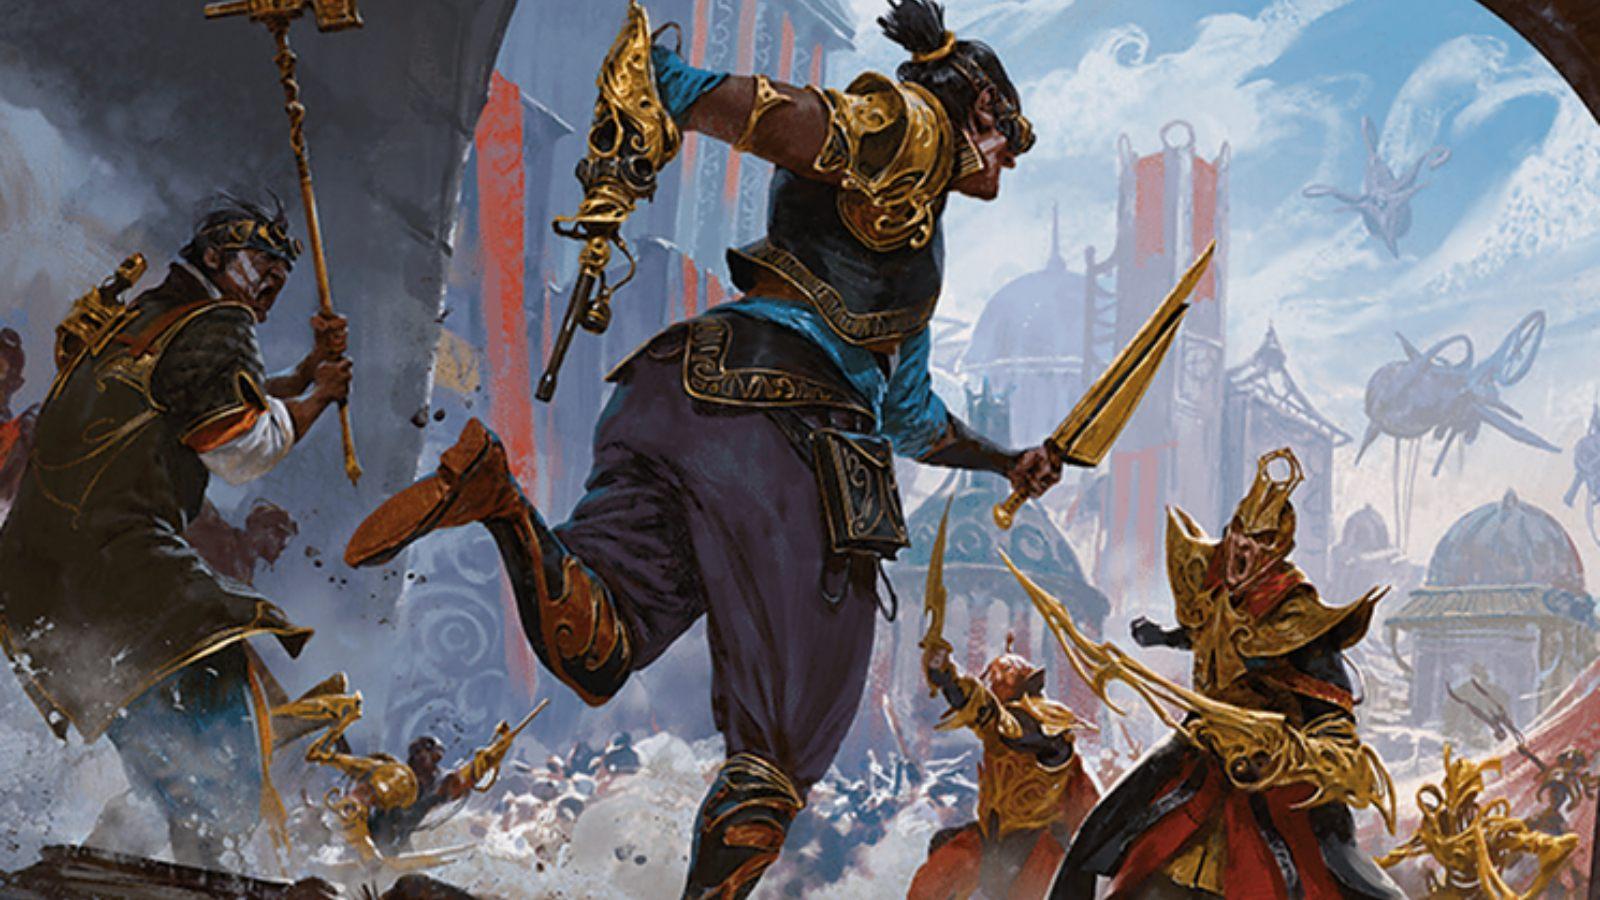 Kaladesh Citizens in MTG's Aether Revolt